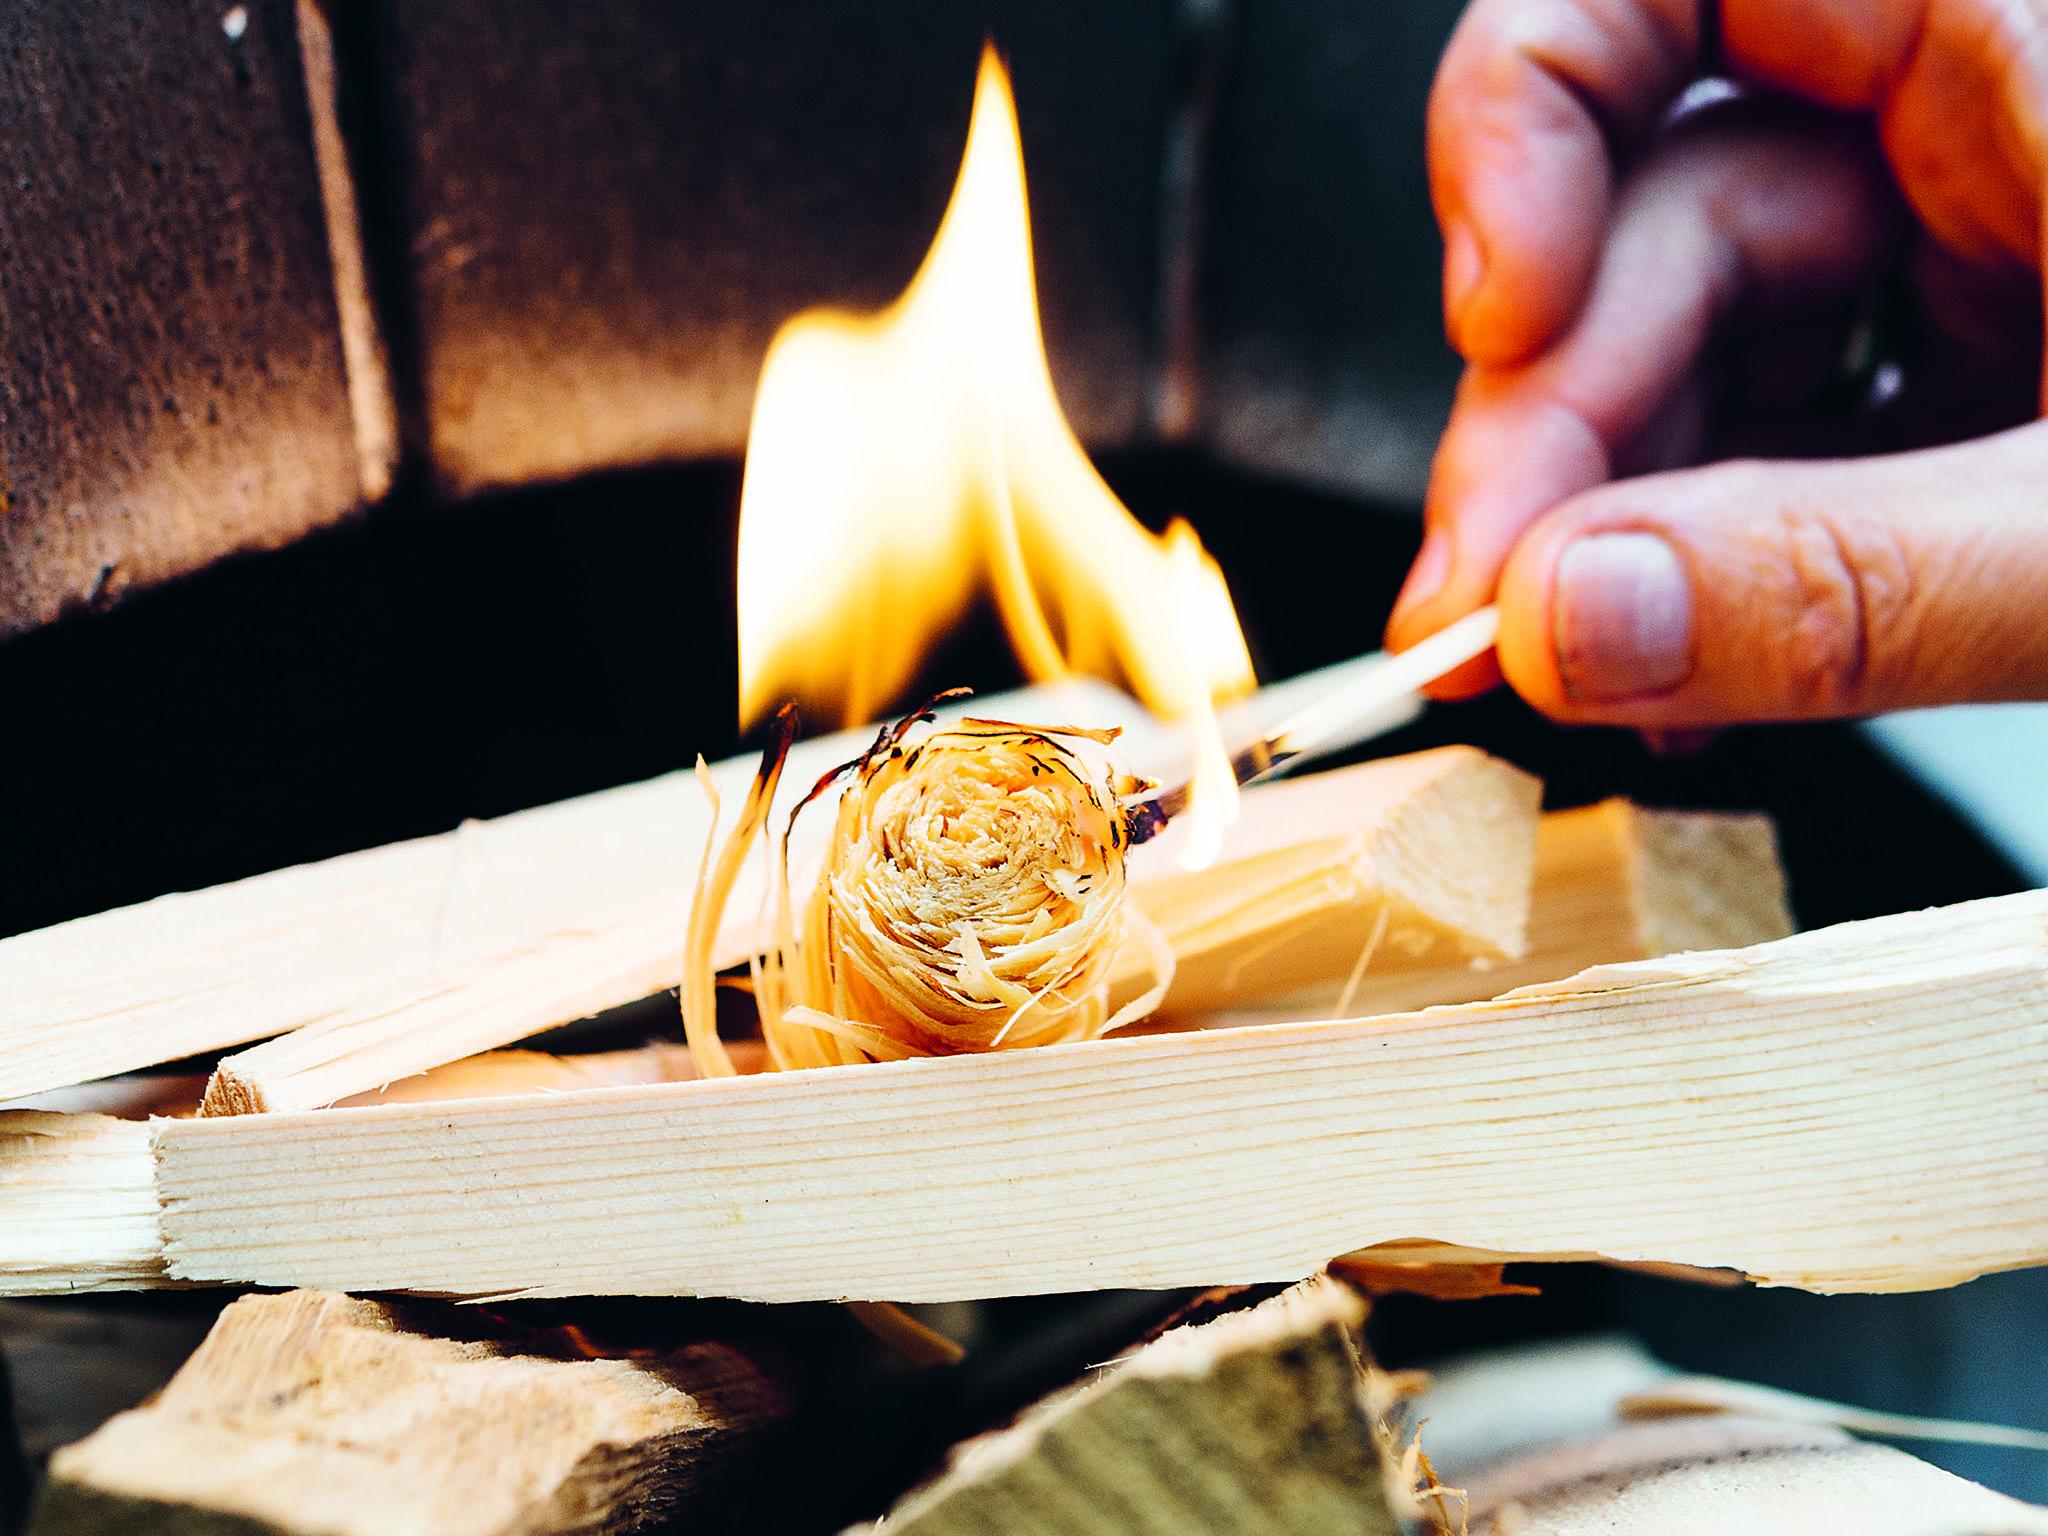 Taylor always start her fire with a neat bundle of wood shavings dipped in wax, as doesn’t give off nasty fumes like regular firelighters (Jason Ingram)